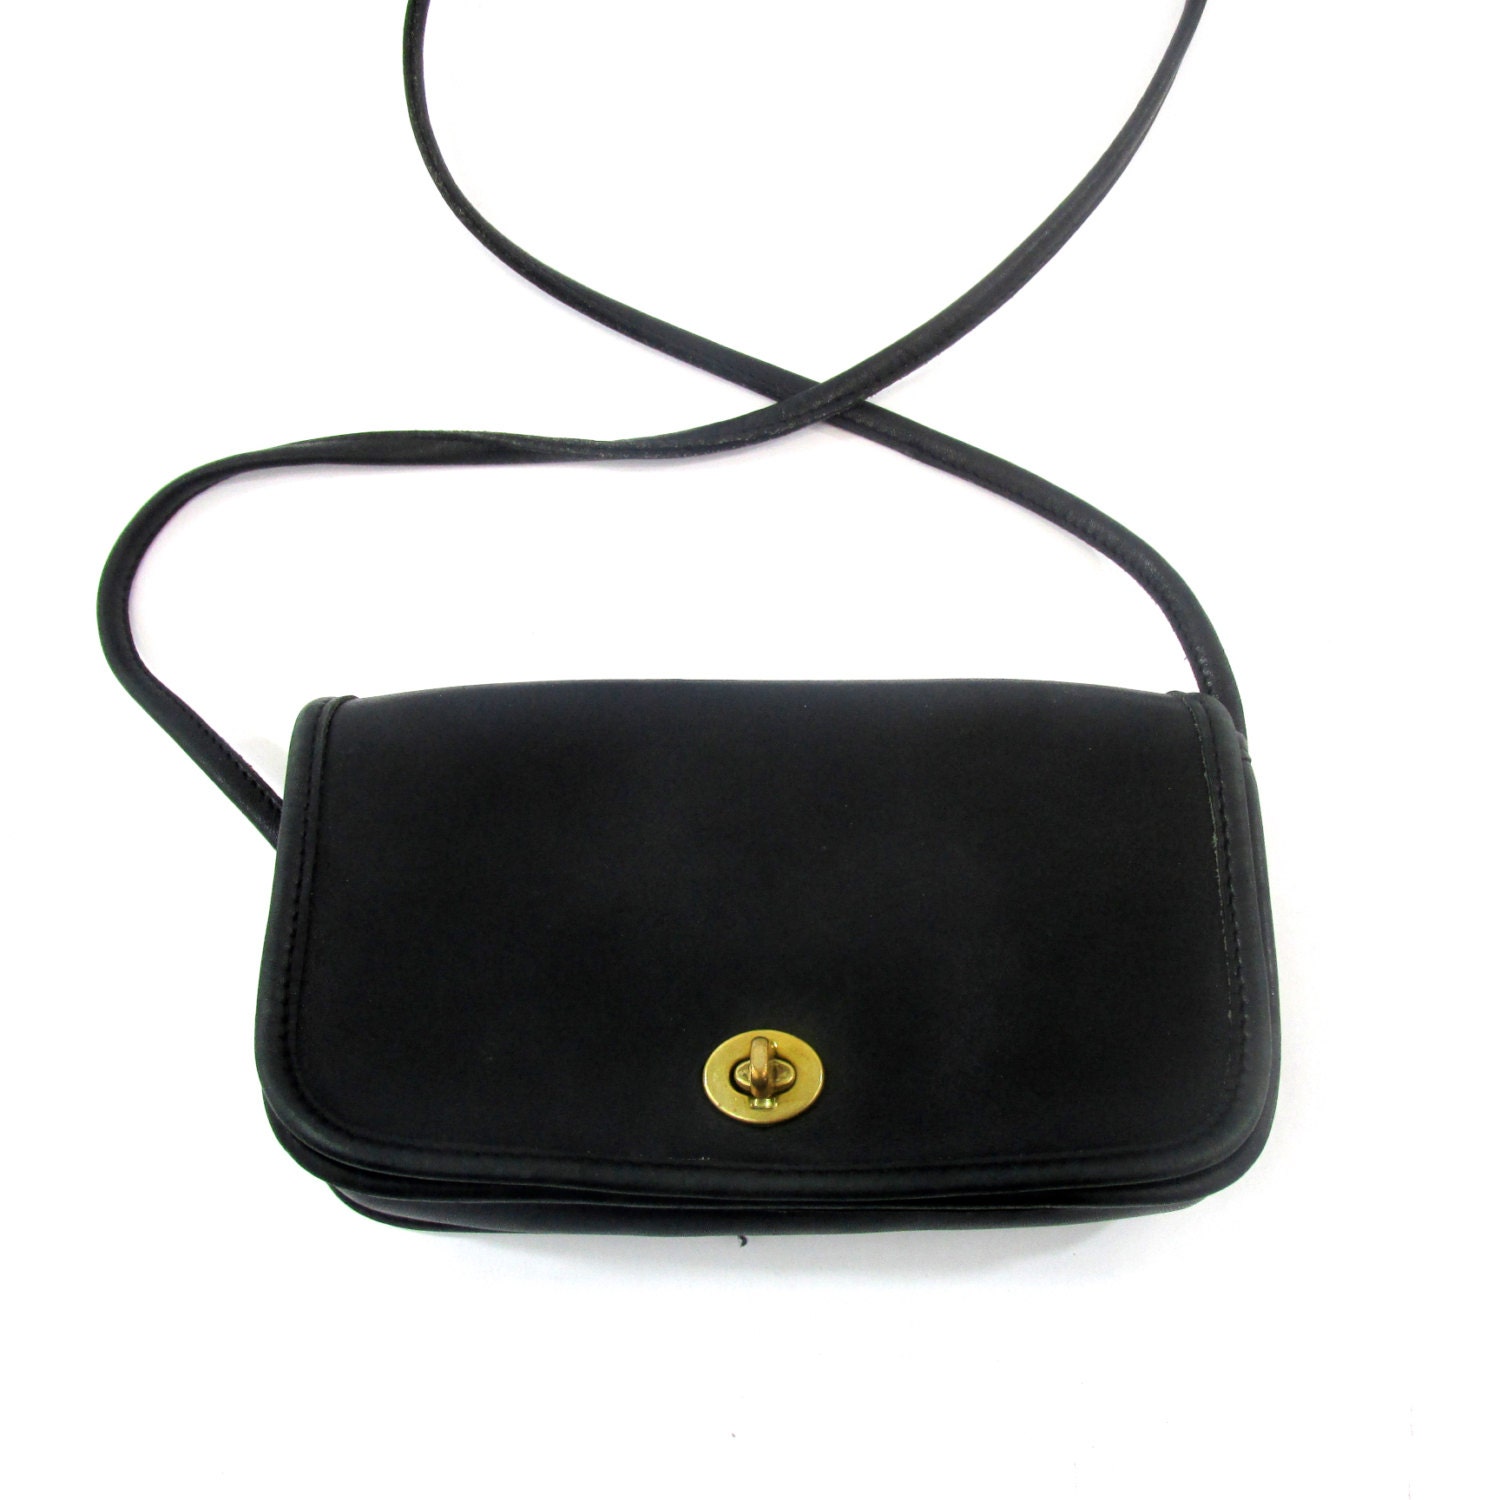 Small Black Coach Purse | Confederated Tribes of the Umatilla Indian Reservation